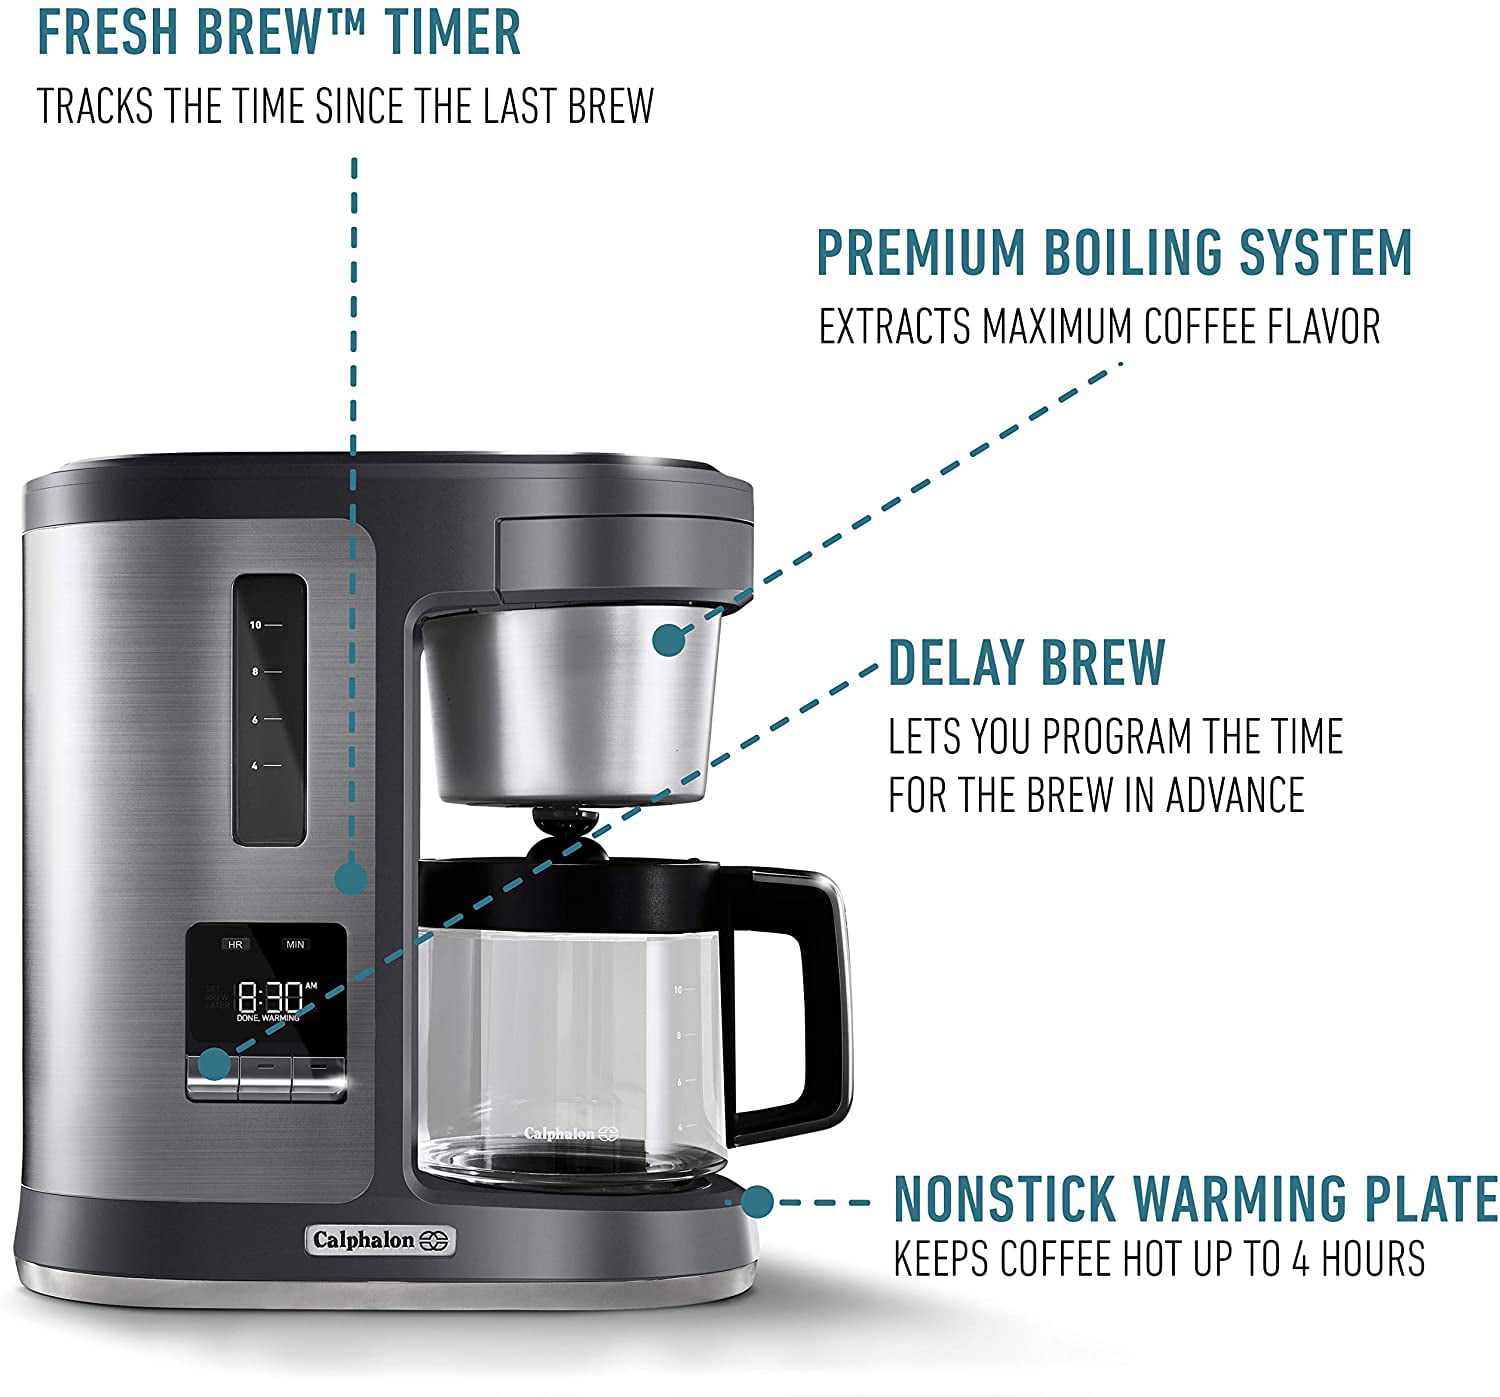 Overview of Calphalon Special Brew 10-Cup, by sabbir